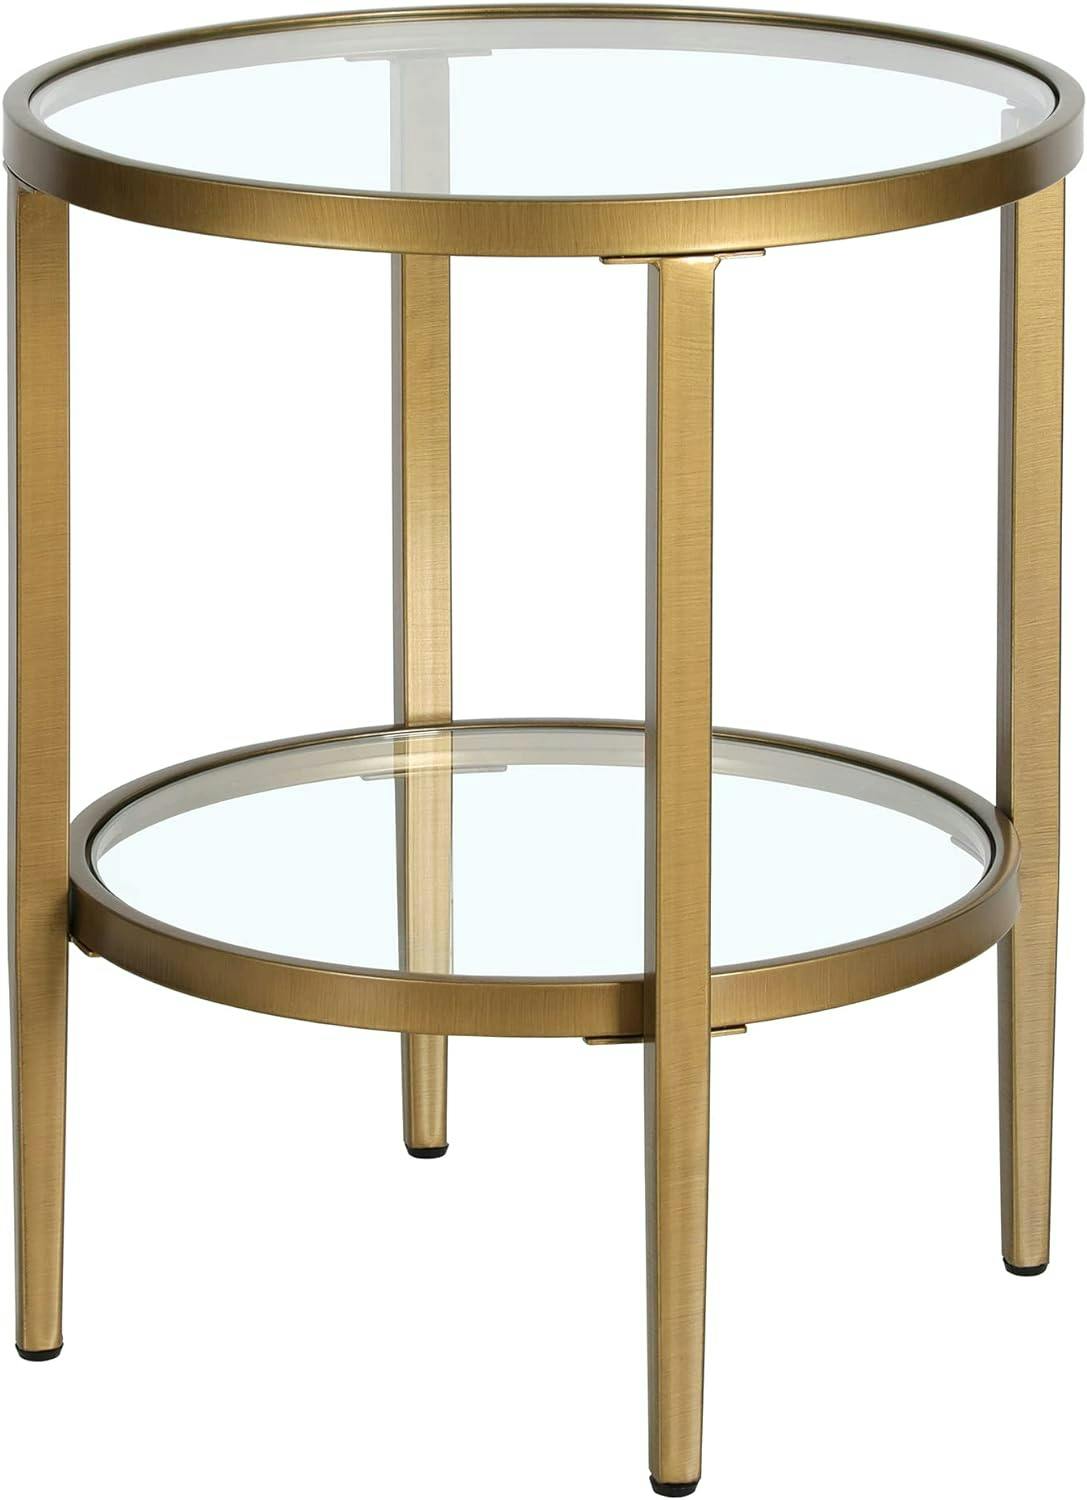 Antique Brass 20" Round Metal and Glass Side Table